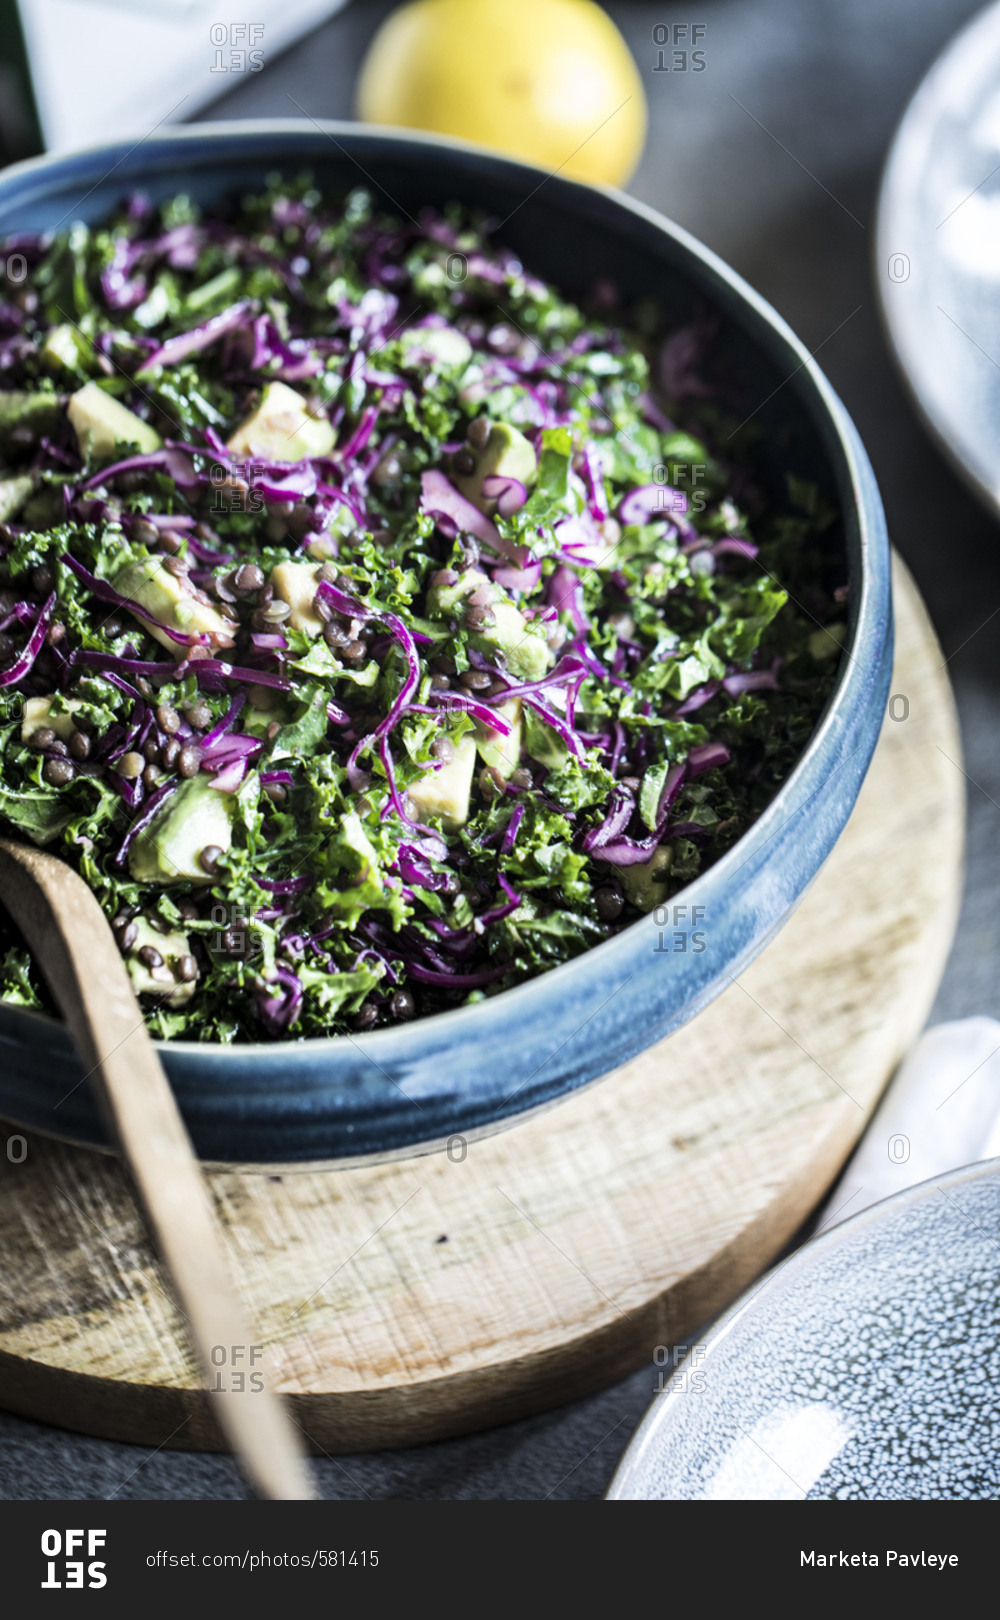 Bowl of chopped salad with purple cabbage, avocado, kale and lentils